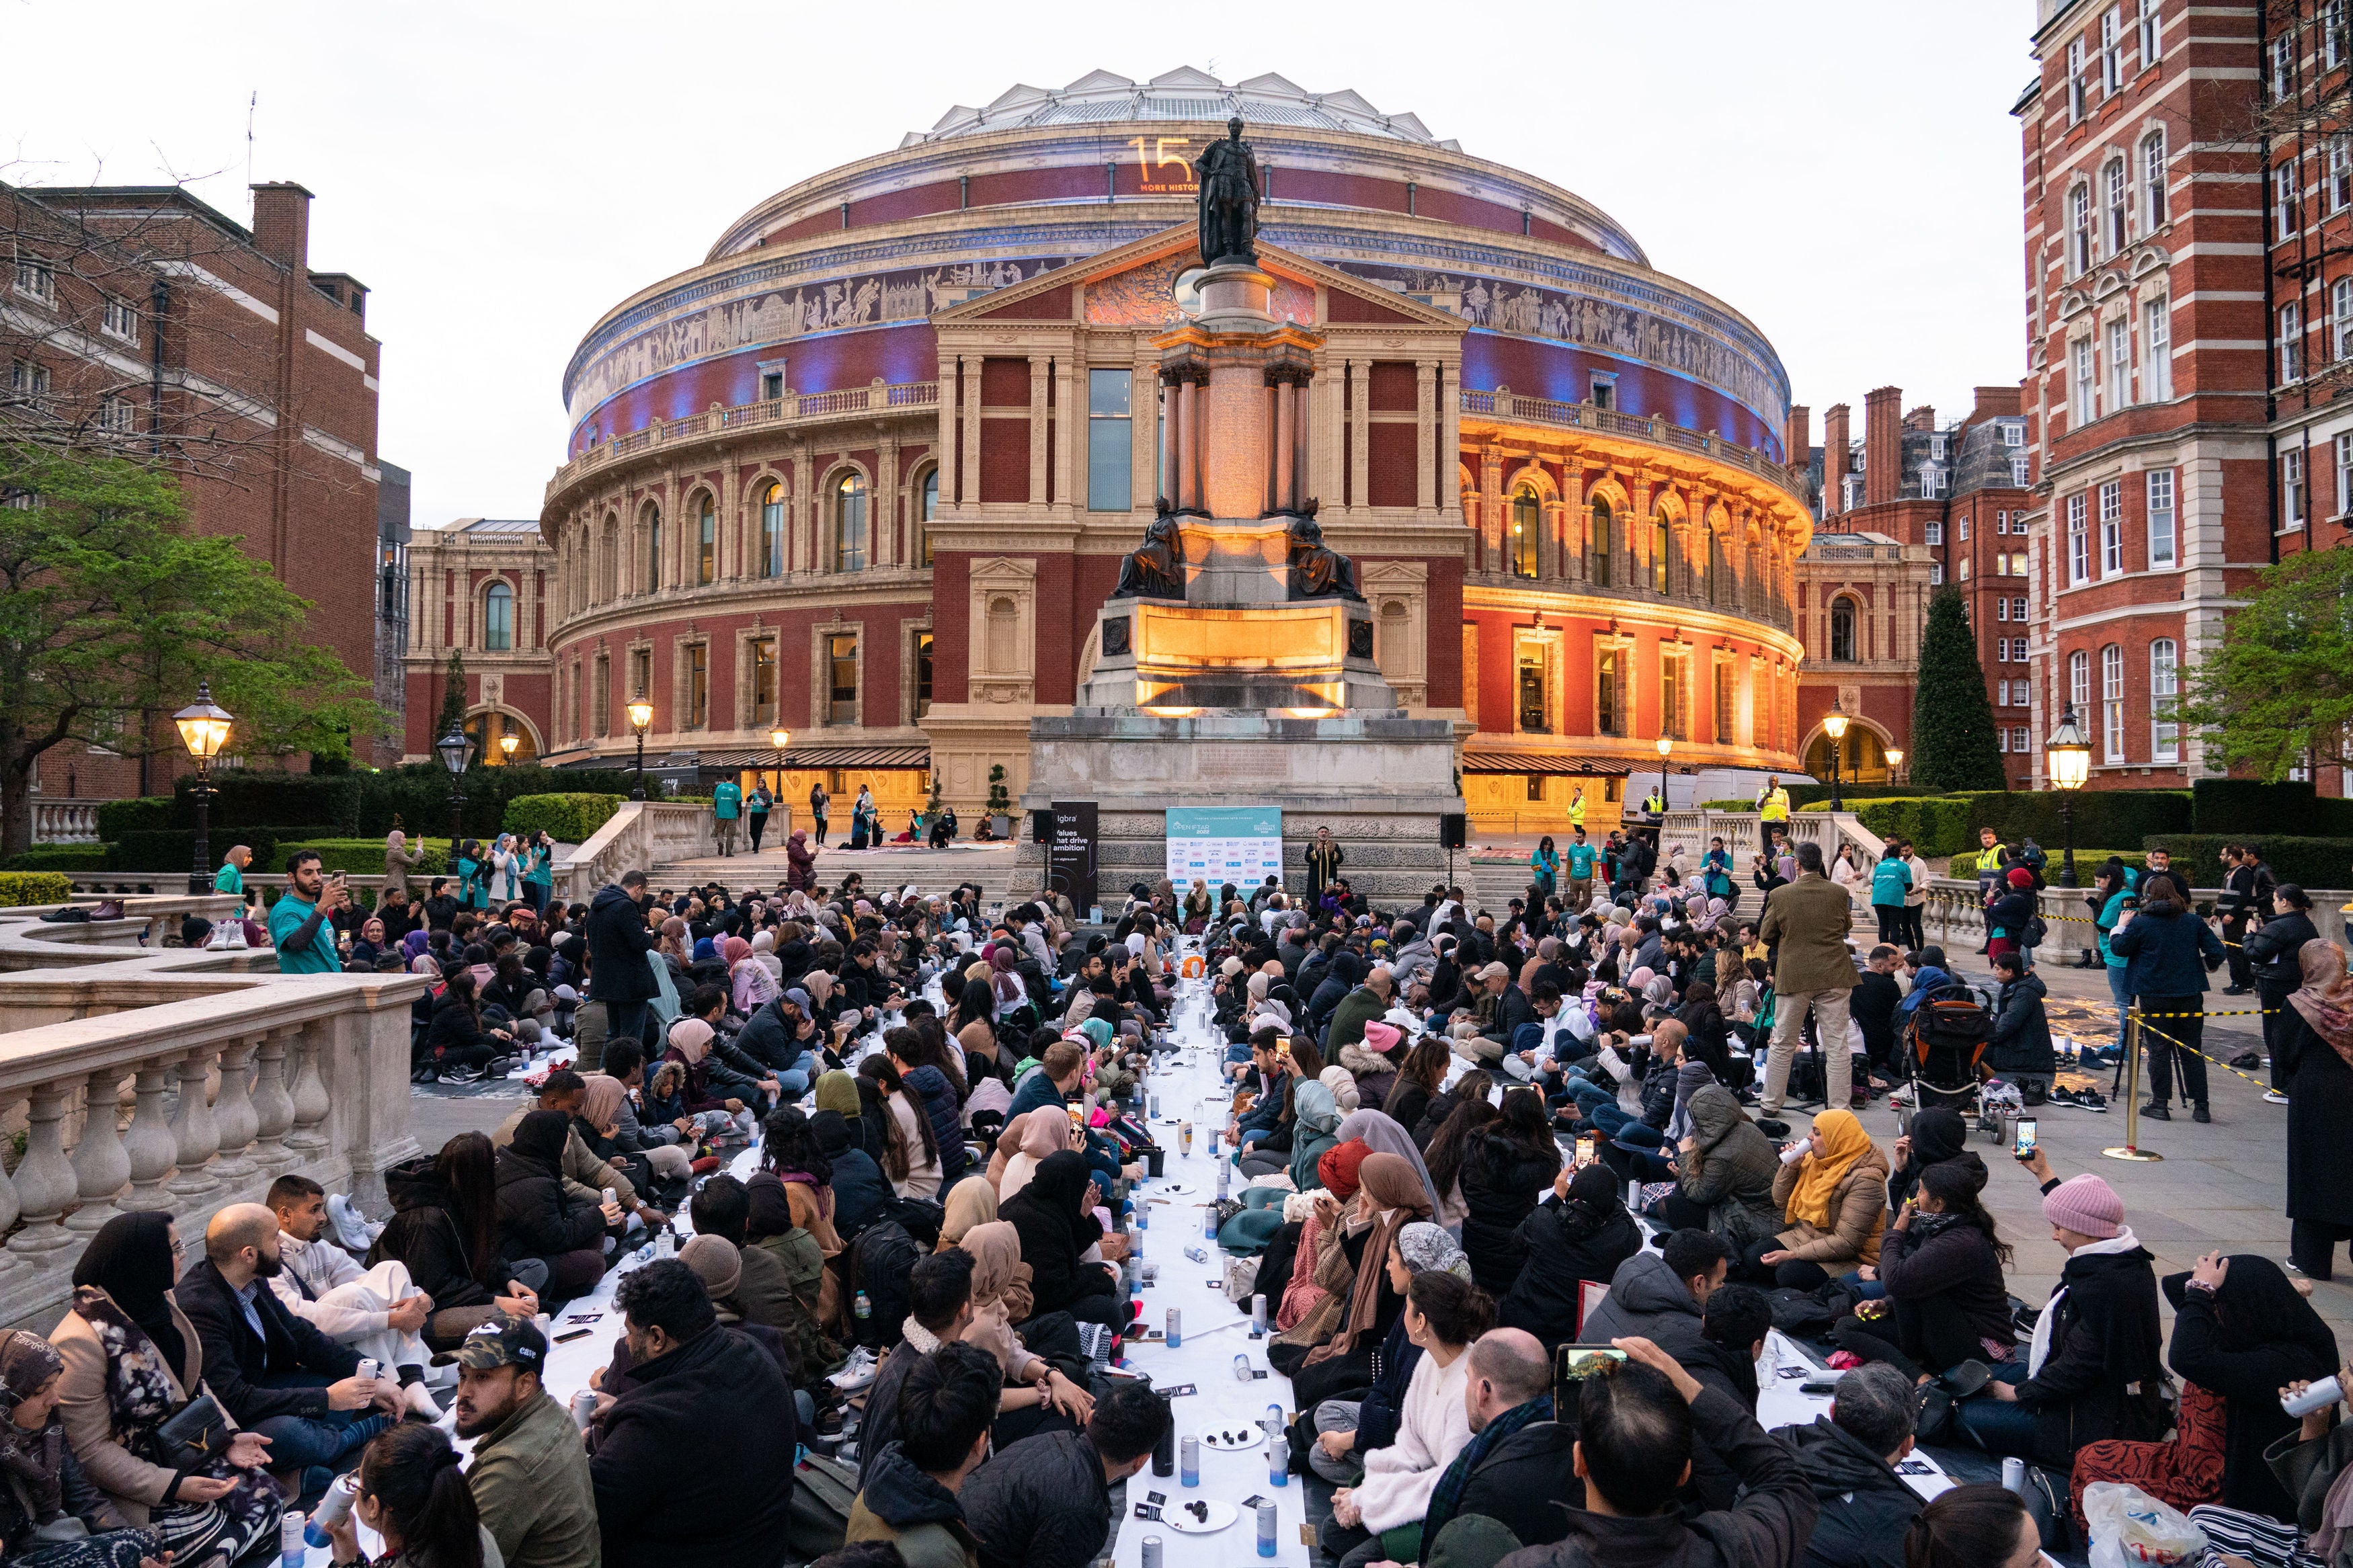 Over 500 people attended the event on the steps of the Royal Albert Hall